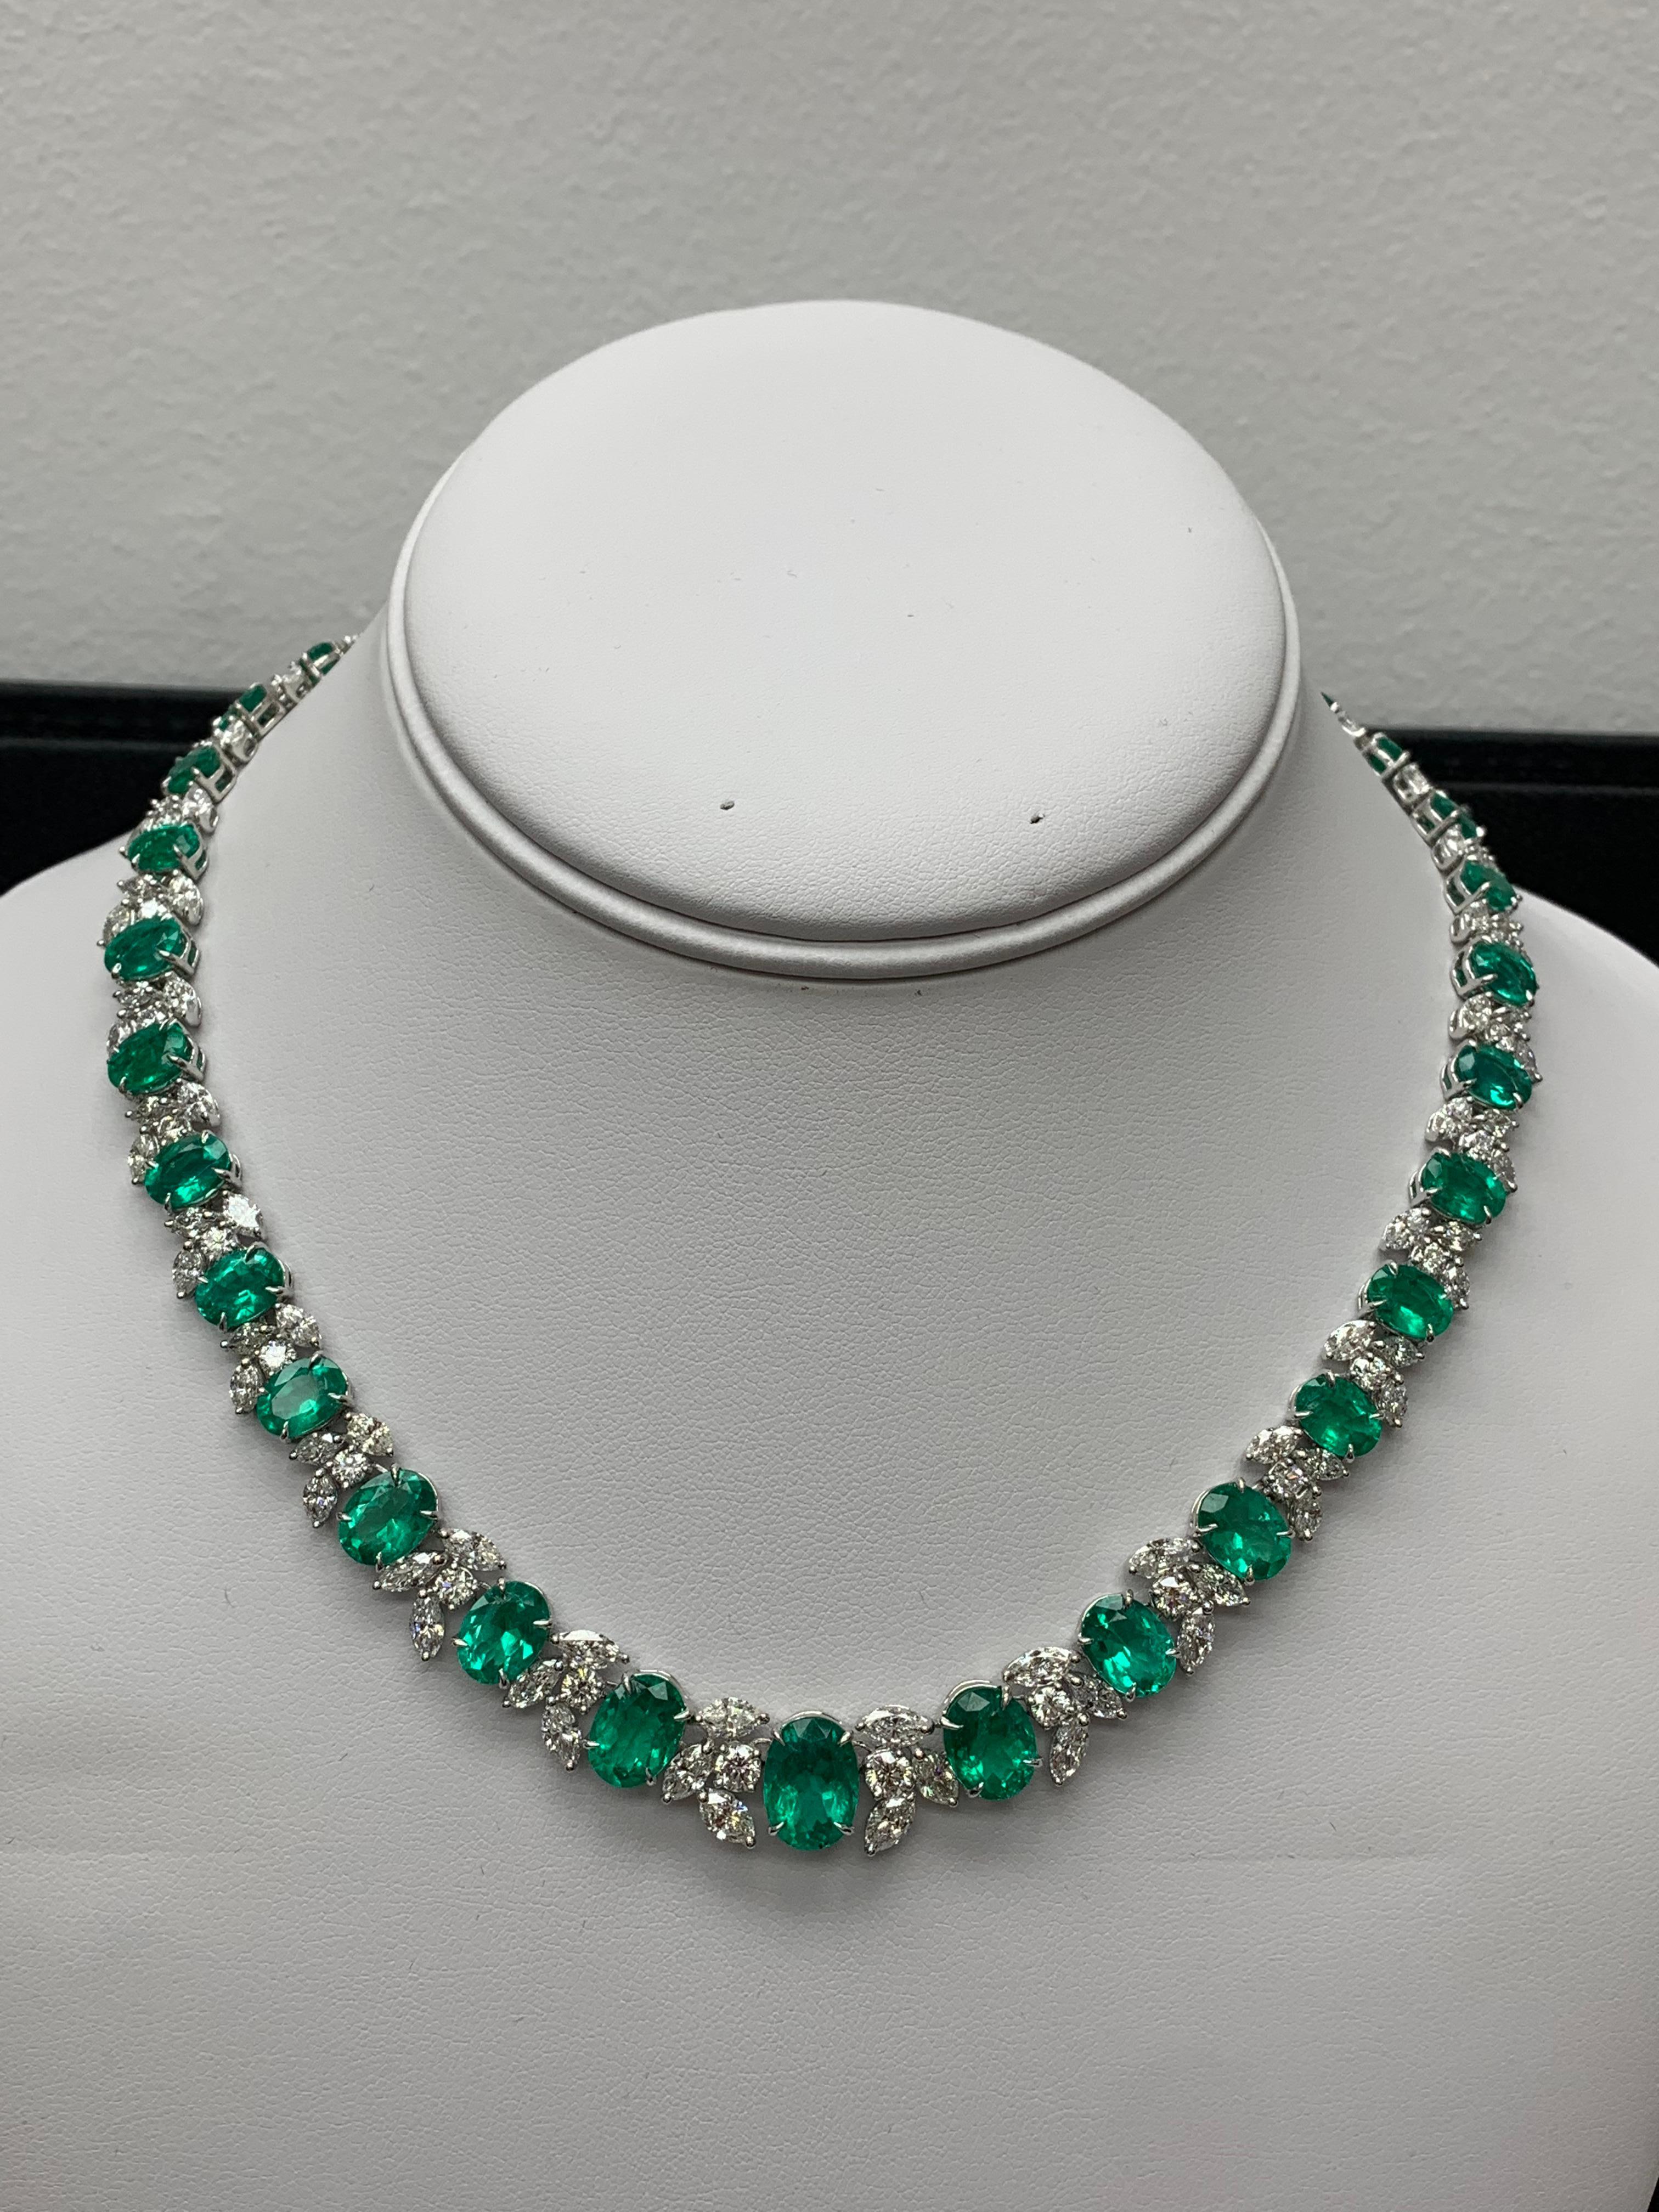 36.87 Carat Emerald and White mixed cut Diamond Necklace in 18k White Gold For Sale 10